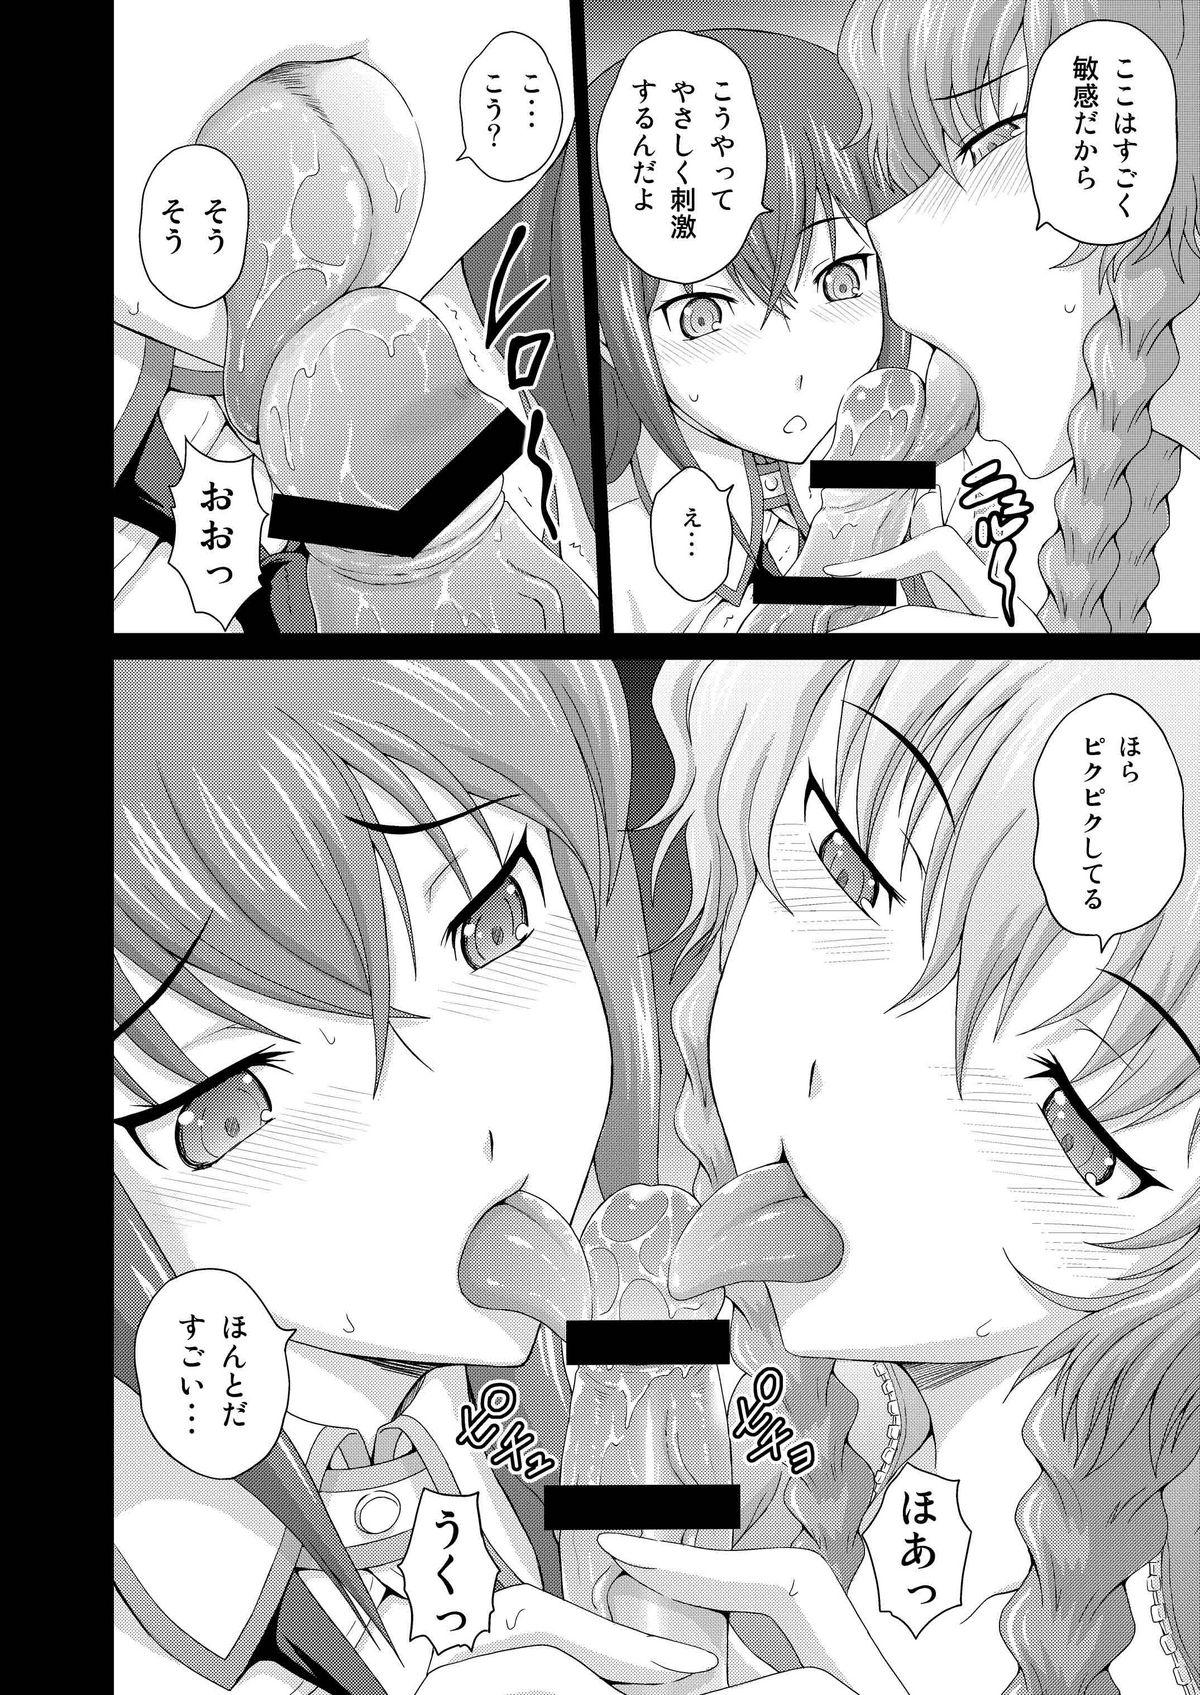 Pussyfucking Heavens;Gate - Steinsgate Sapphic - Page 6